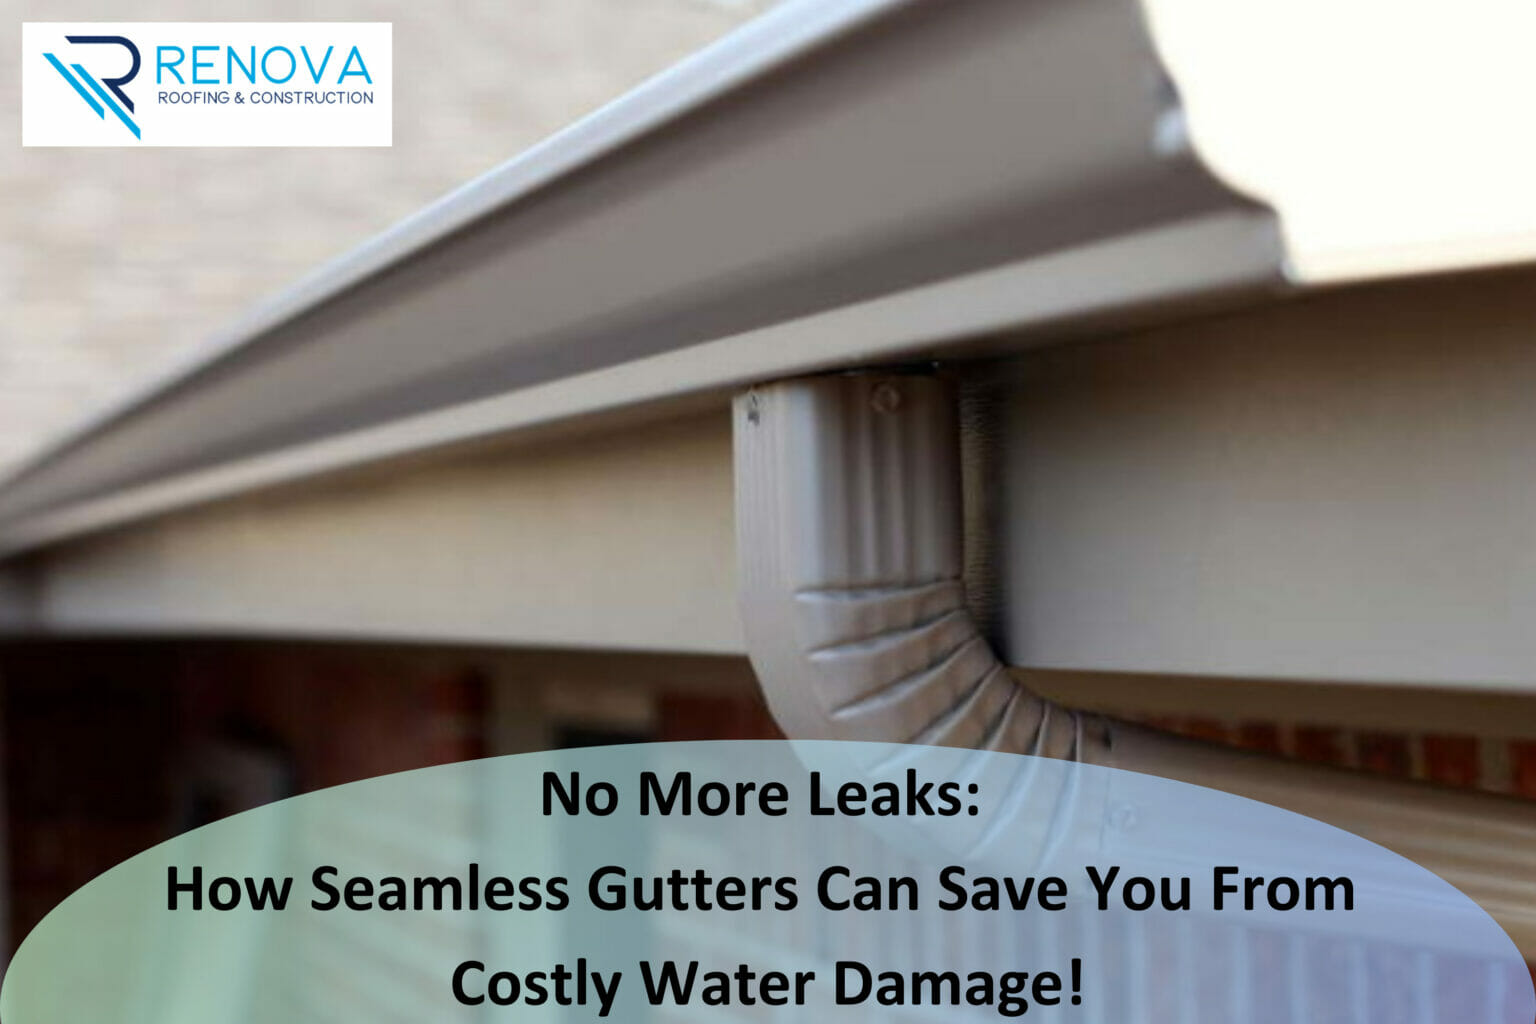 No More Leaks: How Seamless Gutters Can Save You From Costly Water Damage!